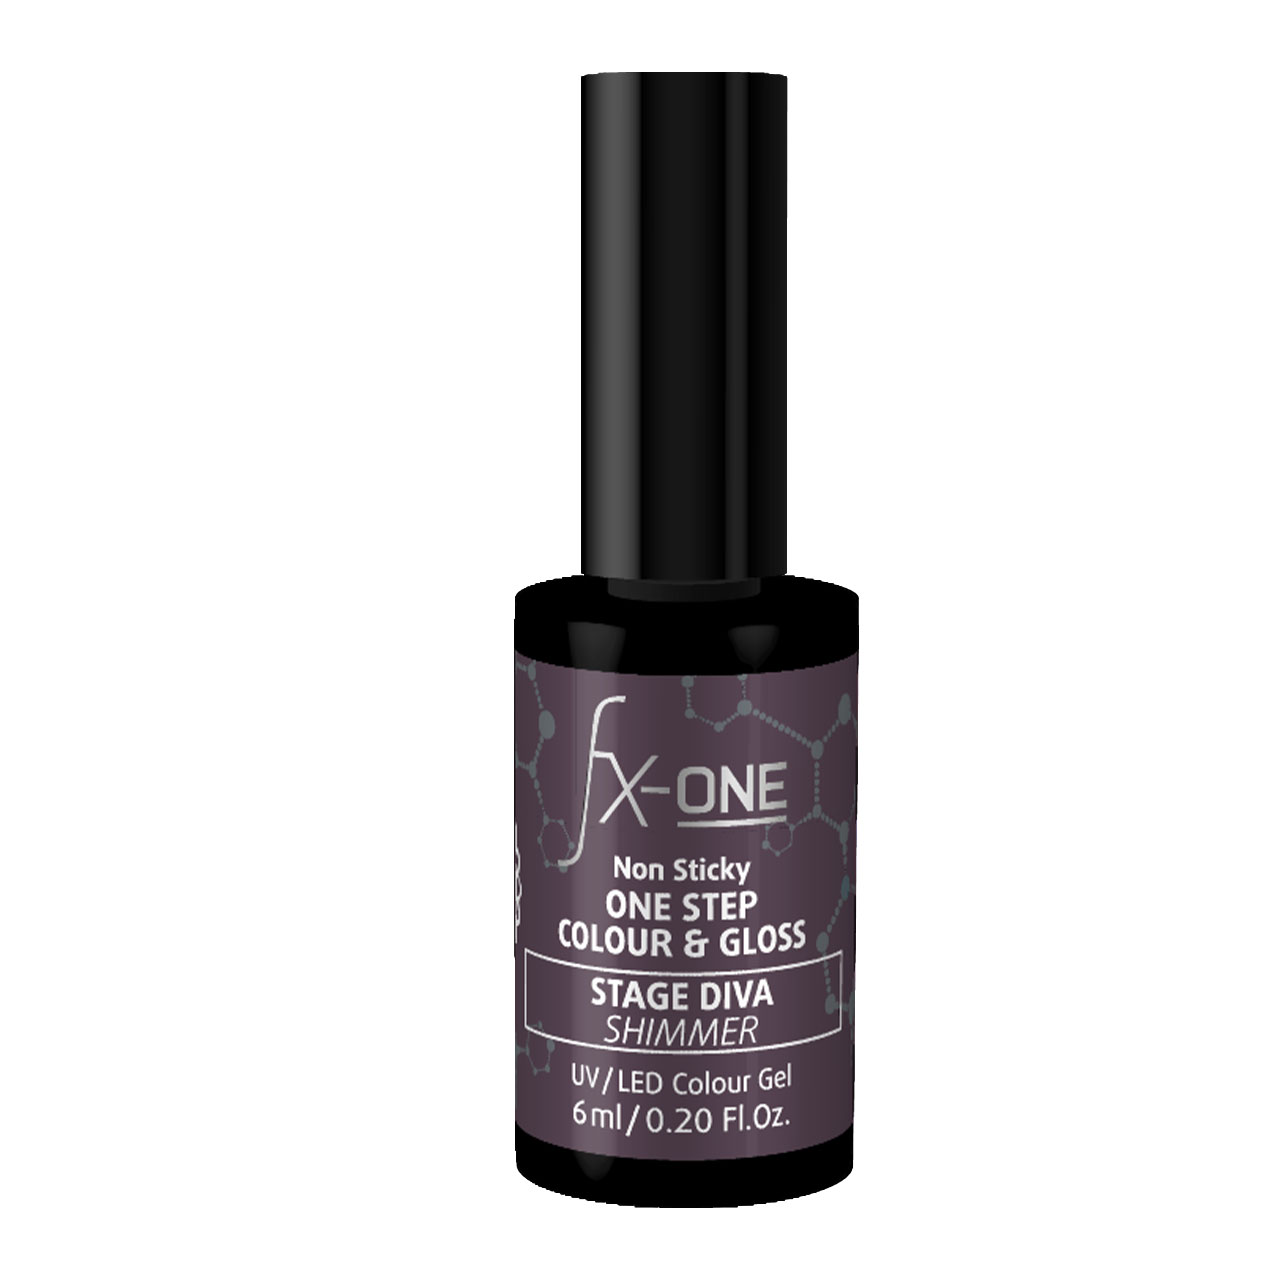 FX-ONE Colour & Gloss Stage Diva 6ml